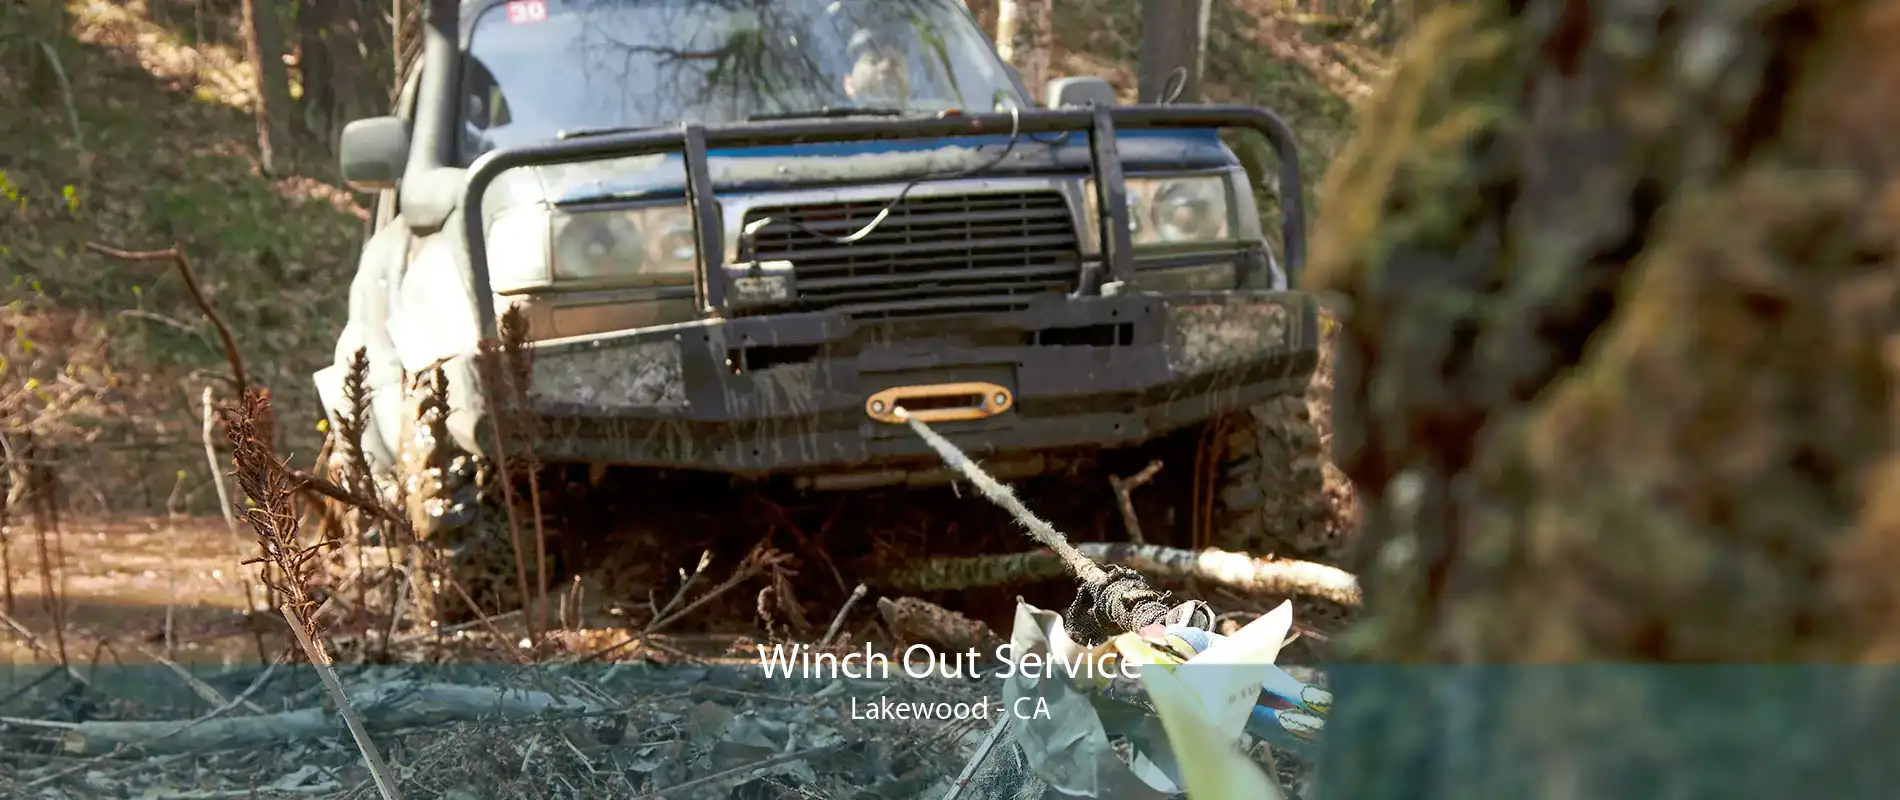 Winch Out Service Lakewood - CA